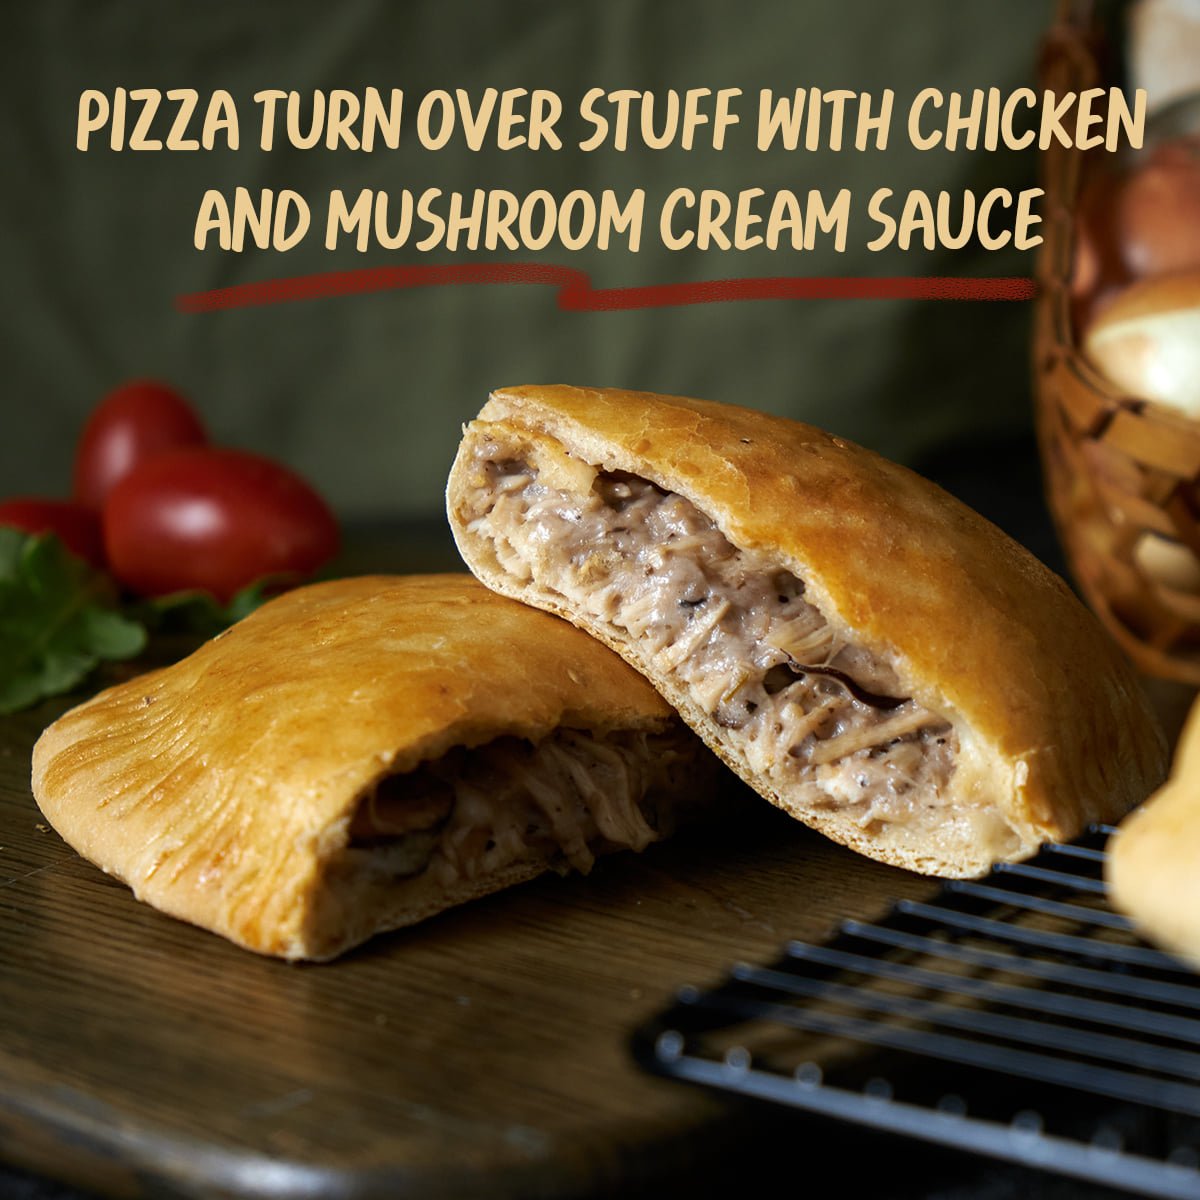 PIZZA TURN OVER STUFF WITH CHICKEN AND MUSHROOM CREAM SAUCE